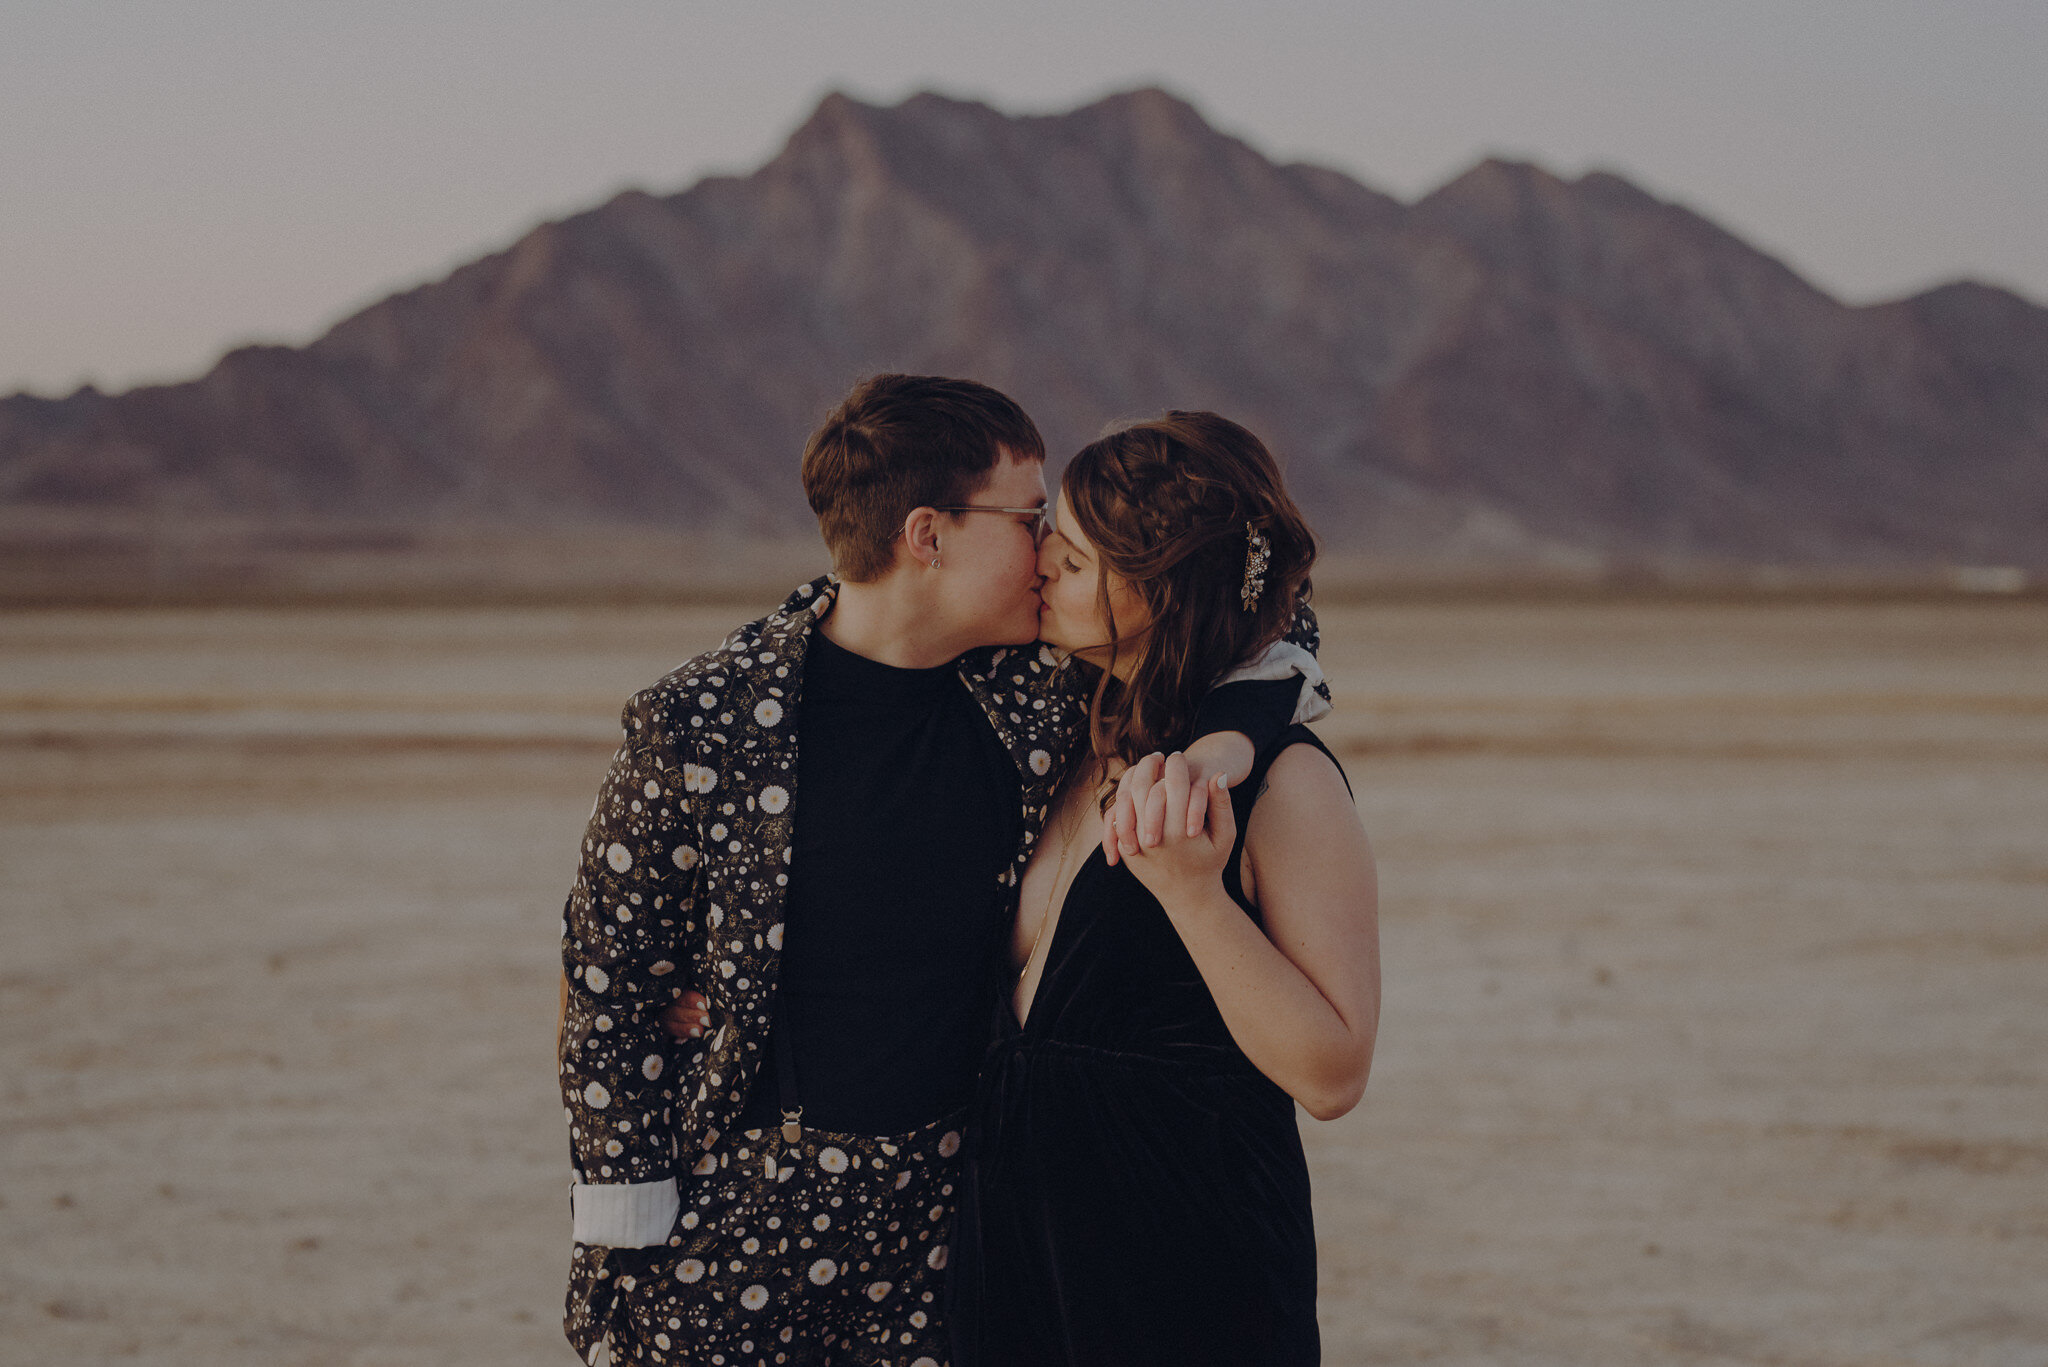 wedding photographer in los angeles - lgbtq wedding photographer - queer engagement session - isaiahandtaylor.com-036.jpg